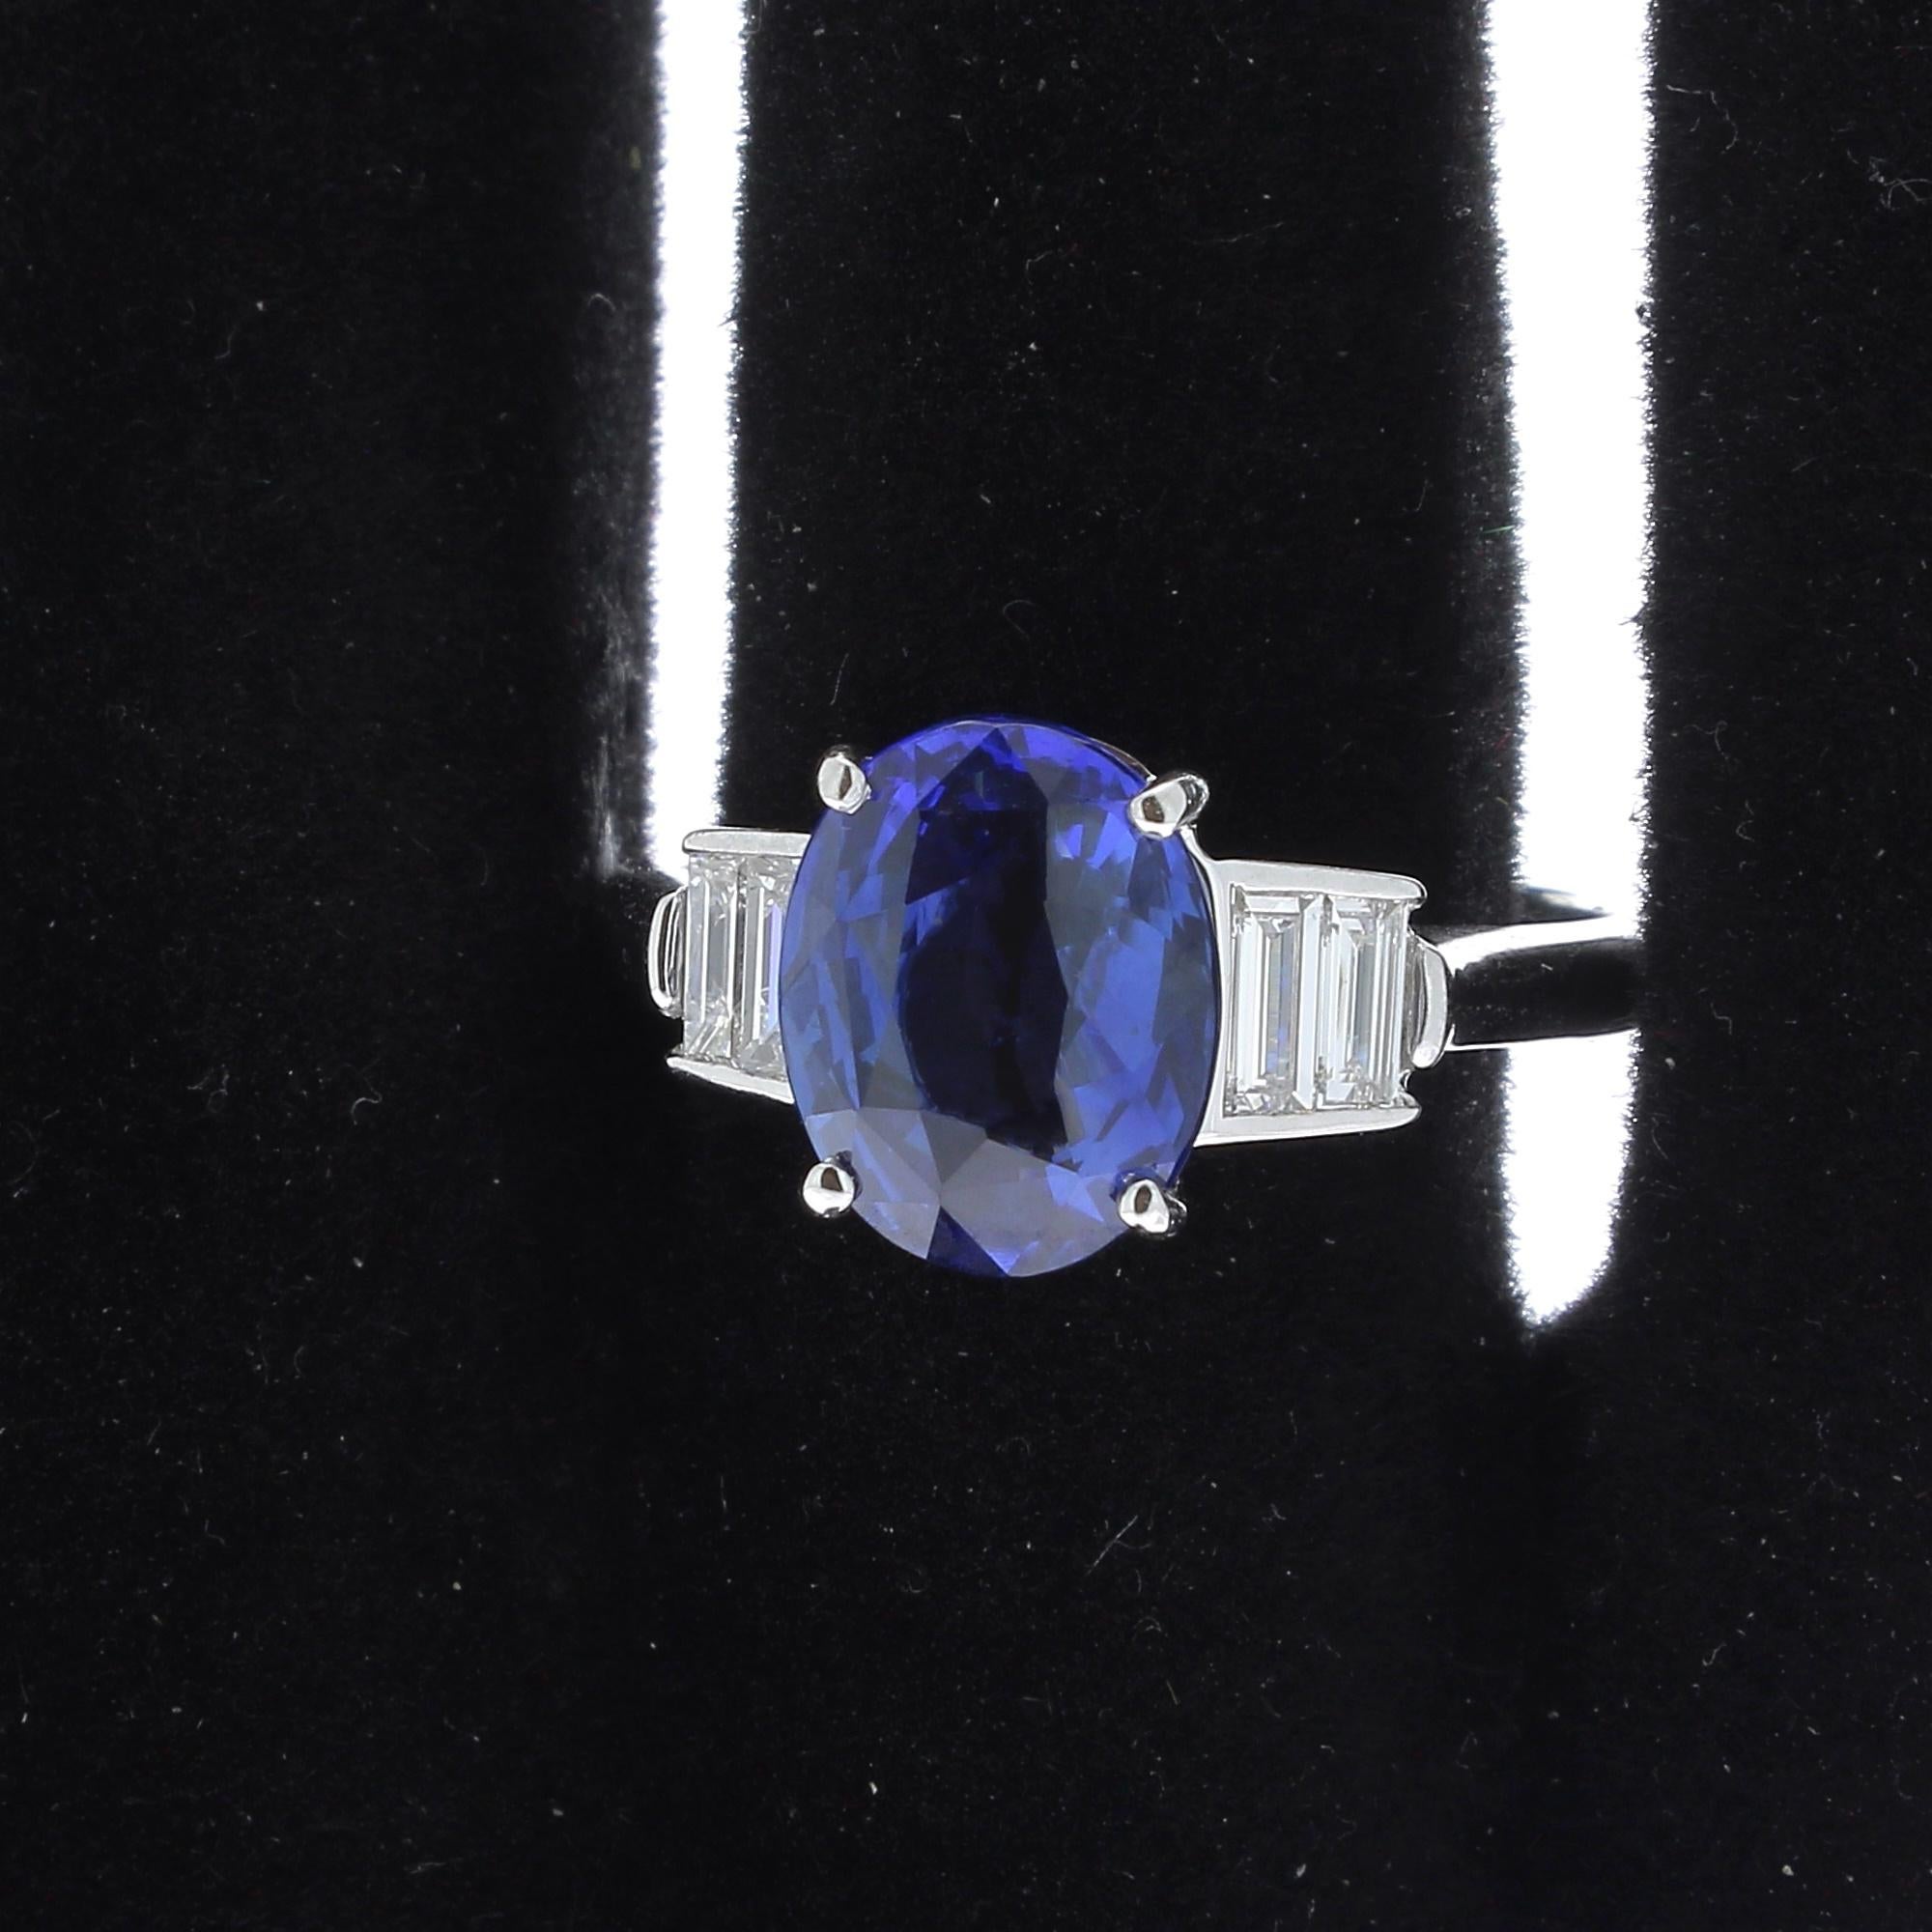 A Ceylon Sapphire Ring, flanked on each side by 2 Baguette Diamonds.
The total weight of the Ceylon Sapphire ( Sri Lanka Sapphire ) is 3.52 Carat.
The Baguette Diamonds weight is 0.30 Carat ( 4 Baguette-cut Diamonds).
The Sapphire is certified as a